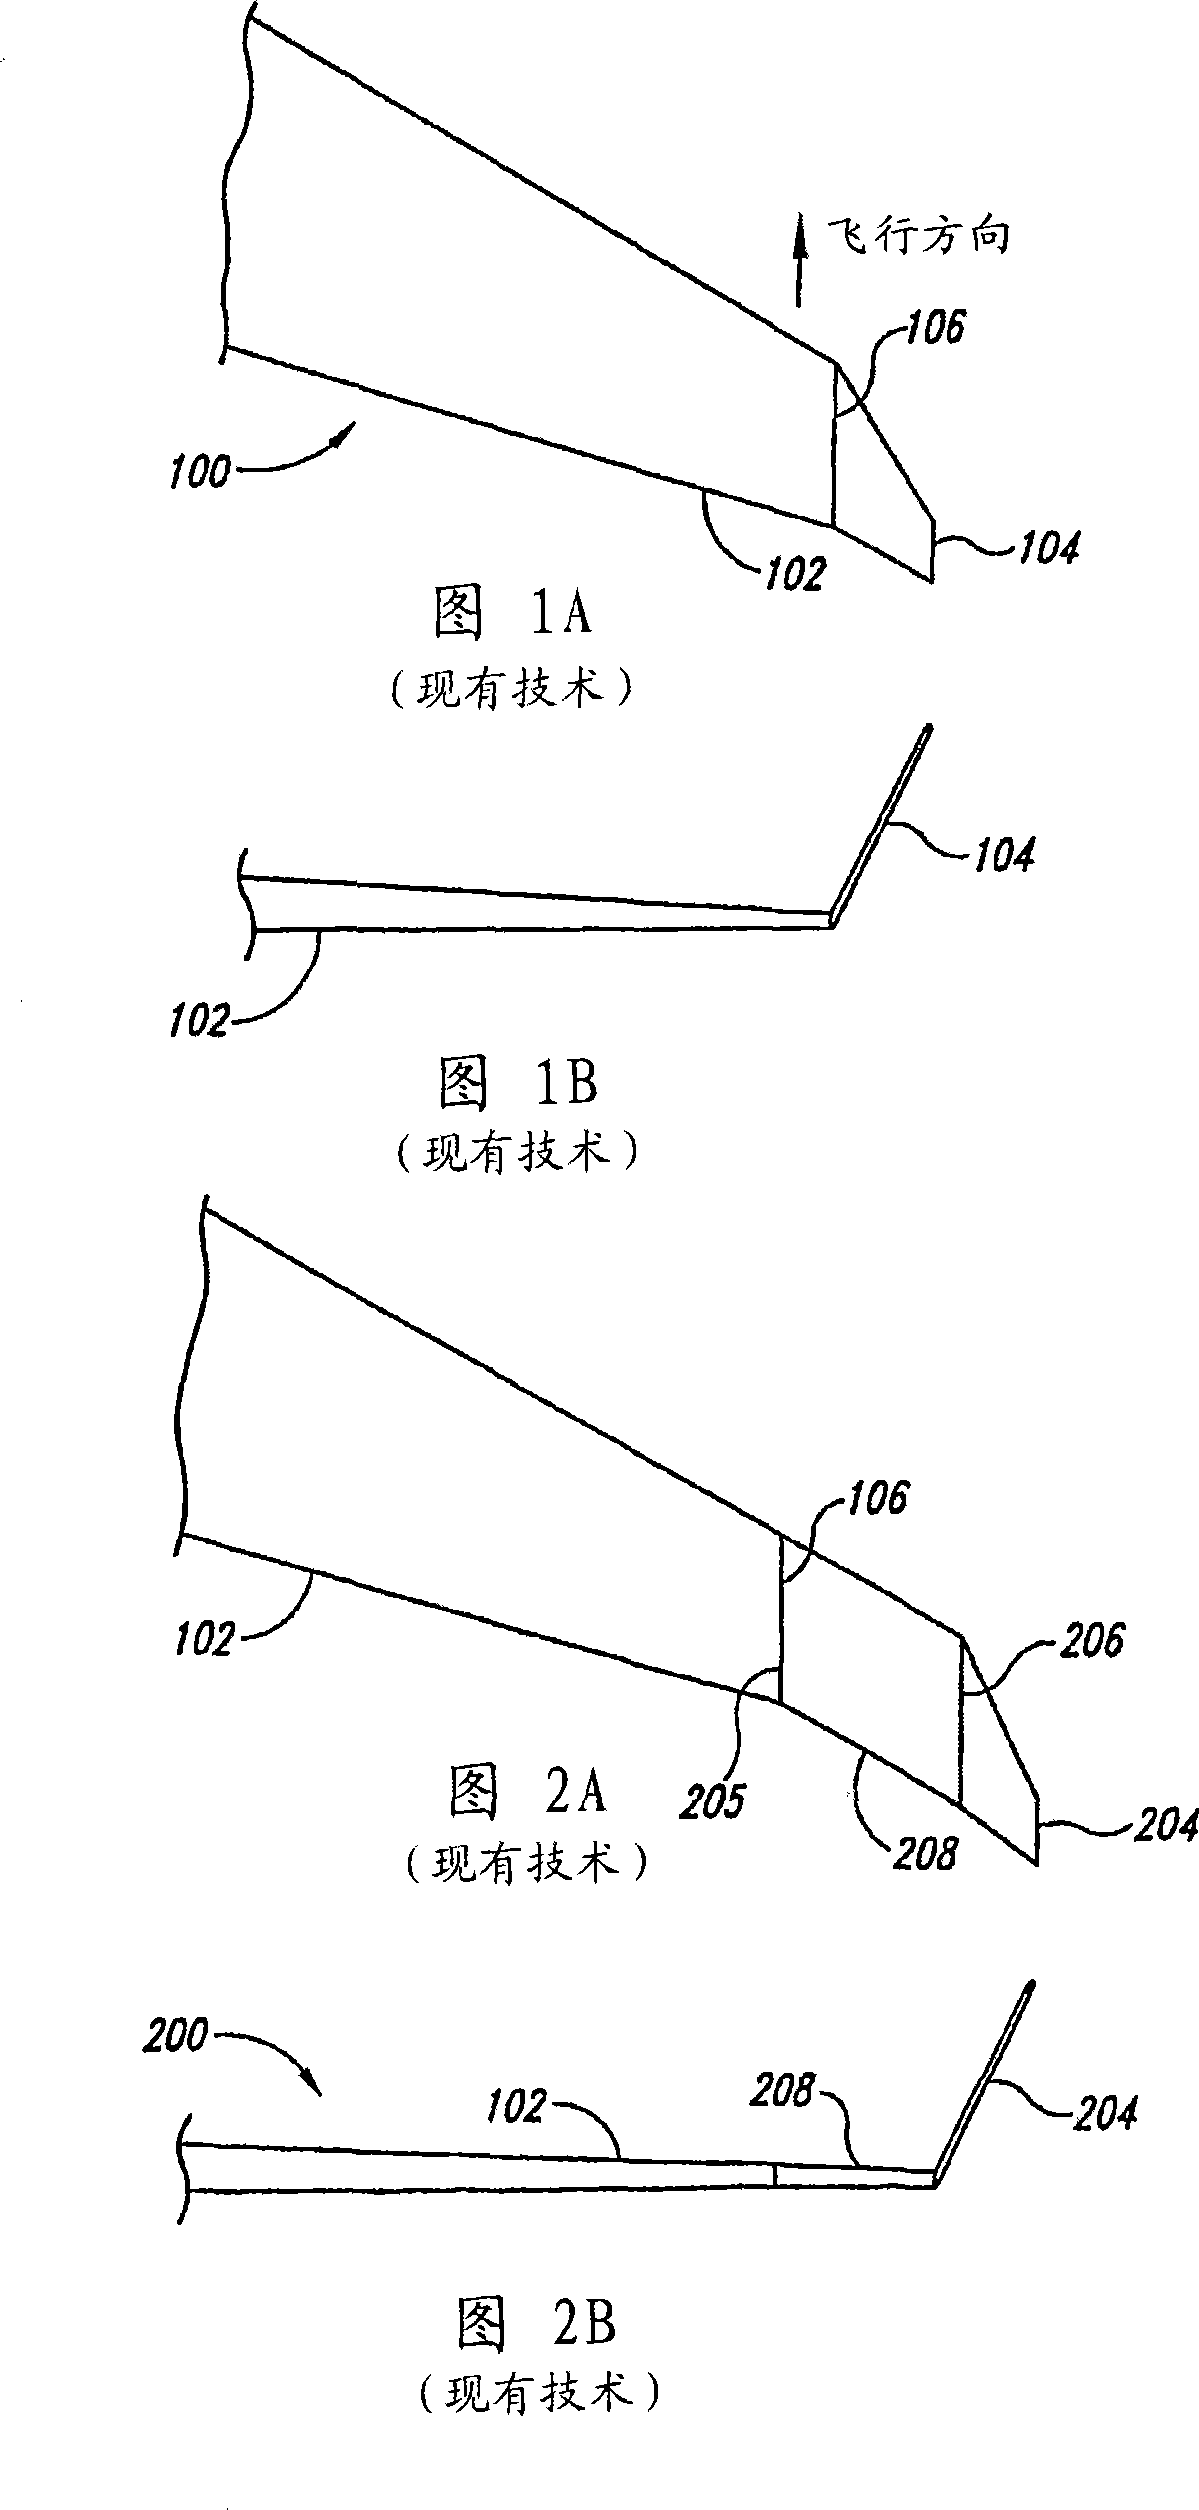 Integrated wingtip extensions for jet transport aircraft and other types of aircraft